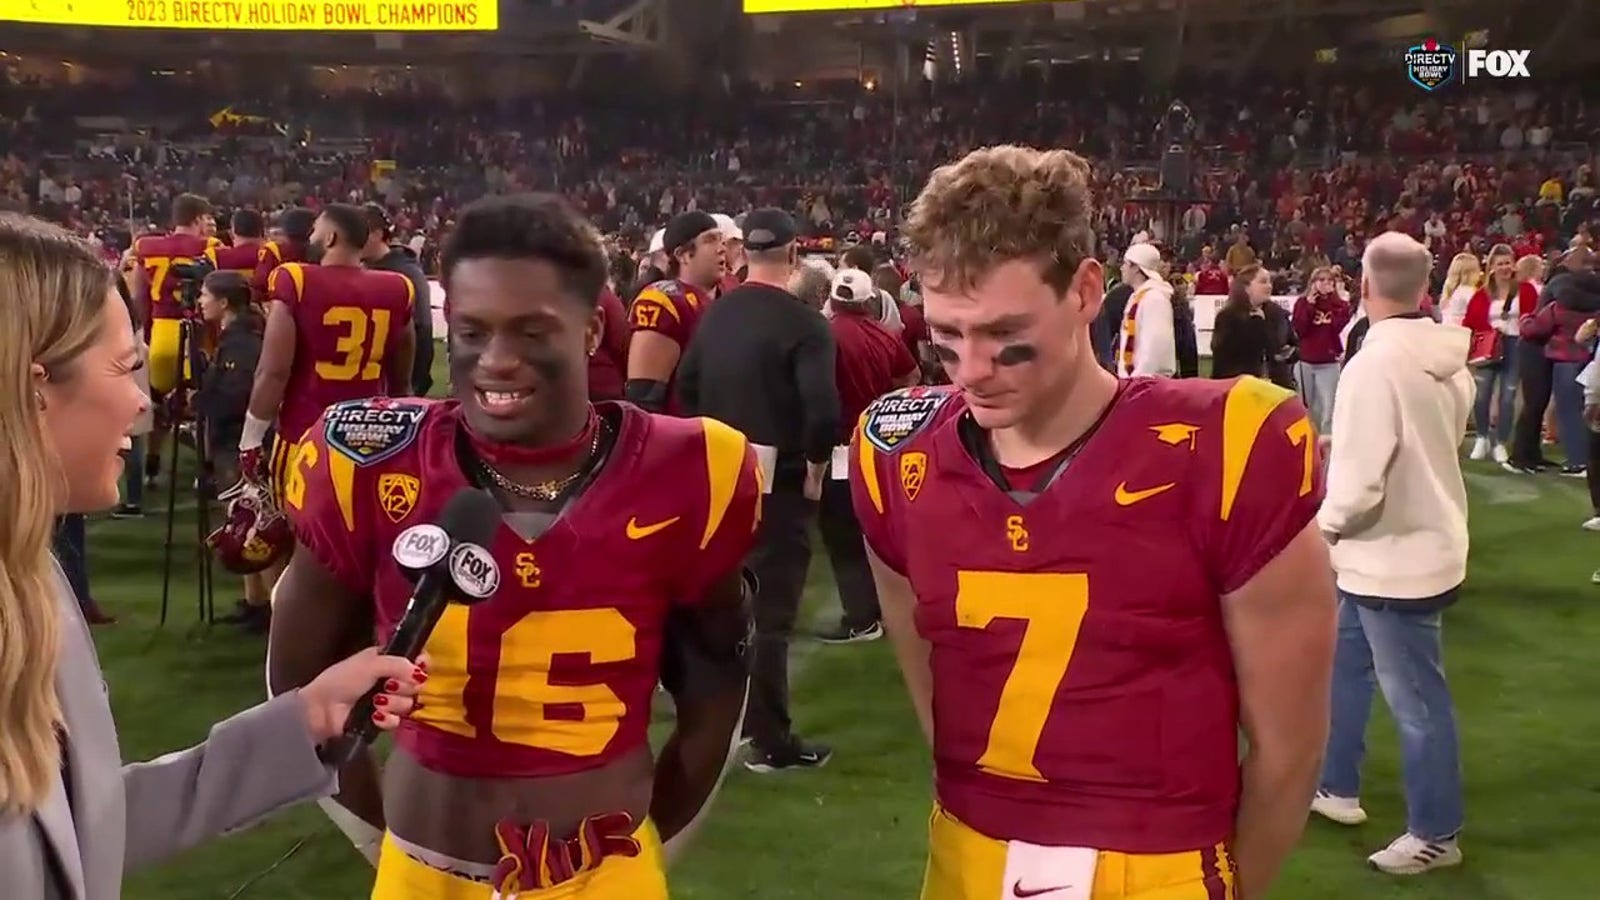 "I'm trying to pinch myself right now" — USC's Miller Moss